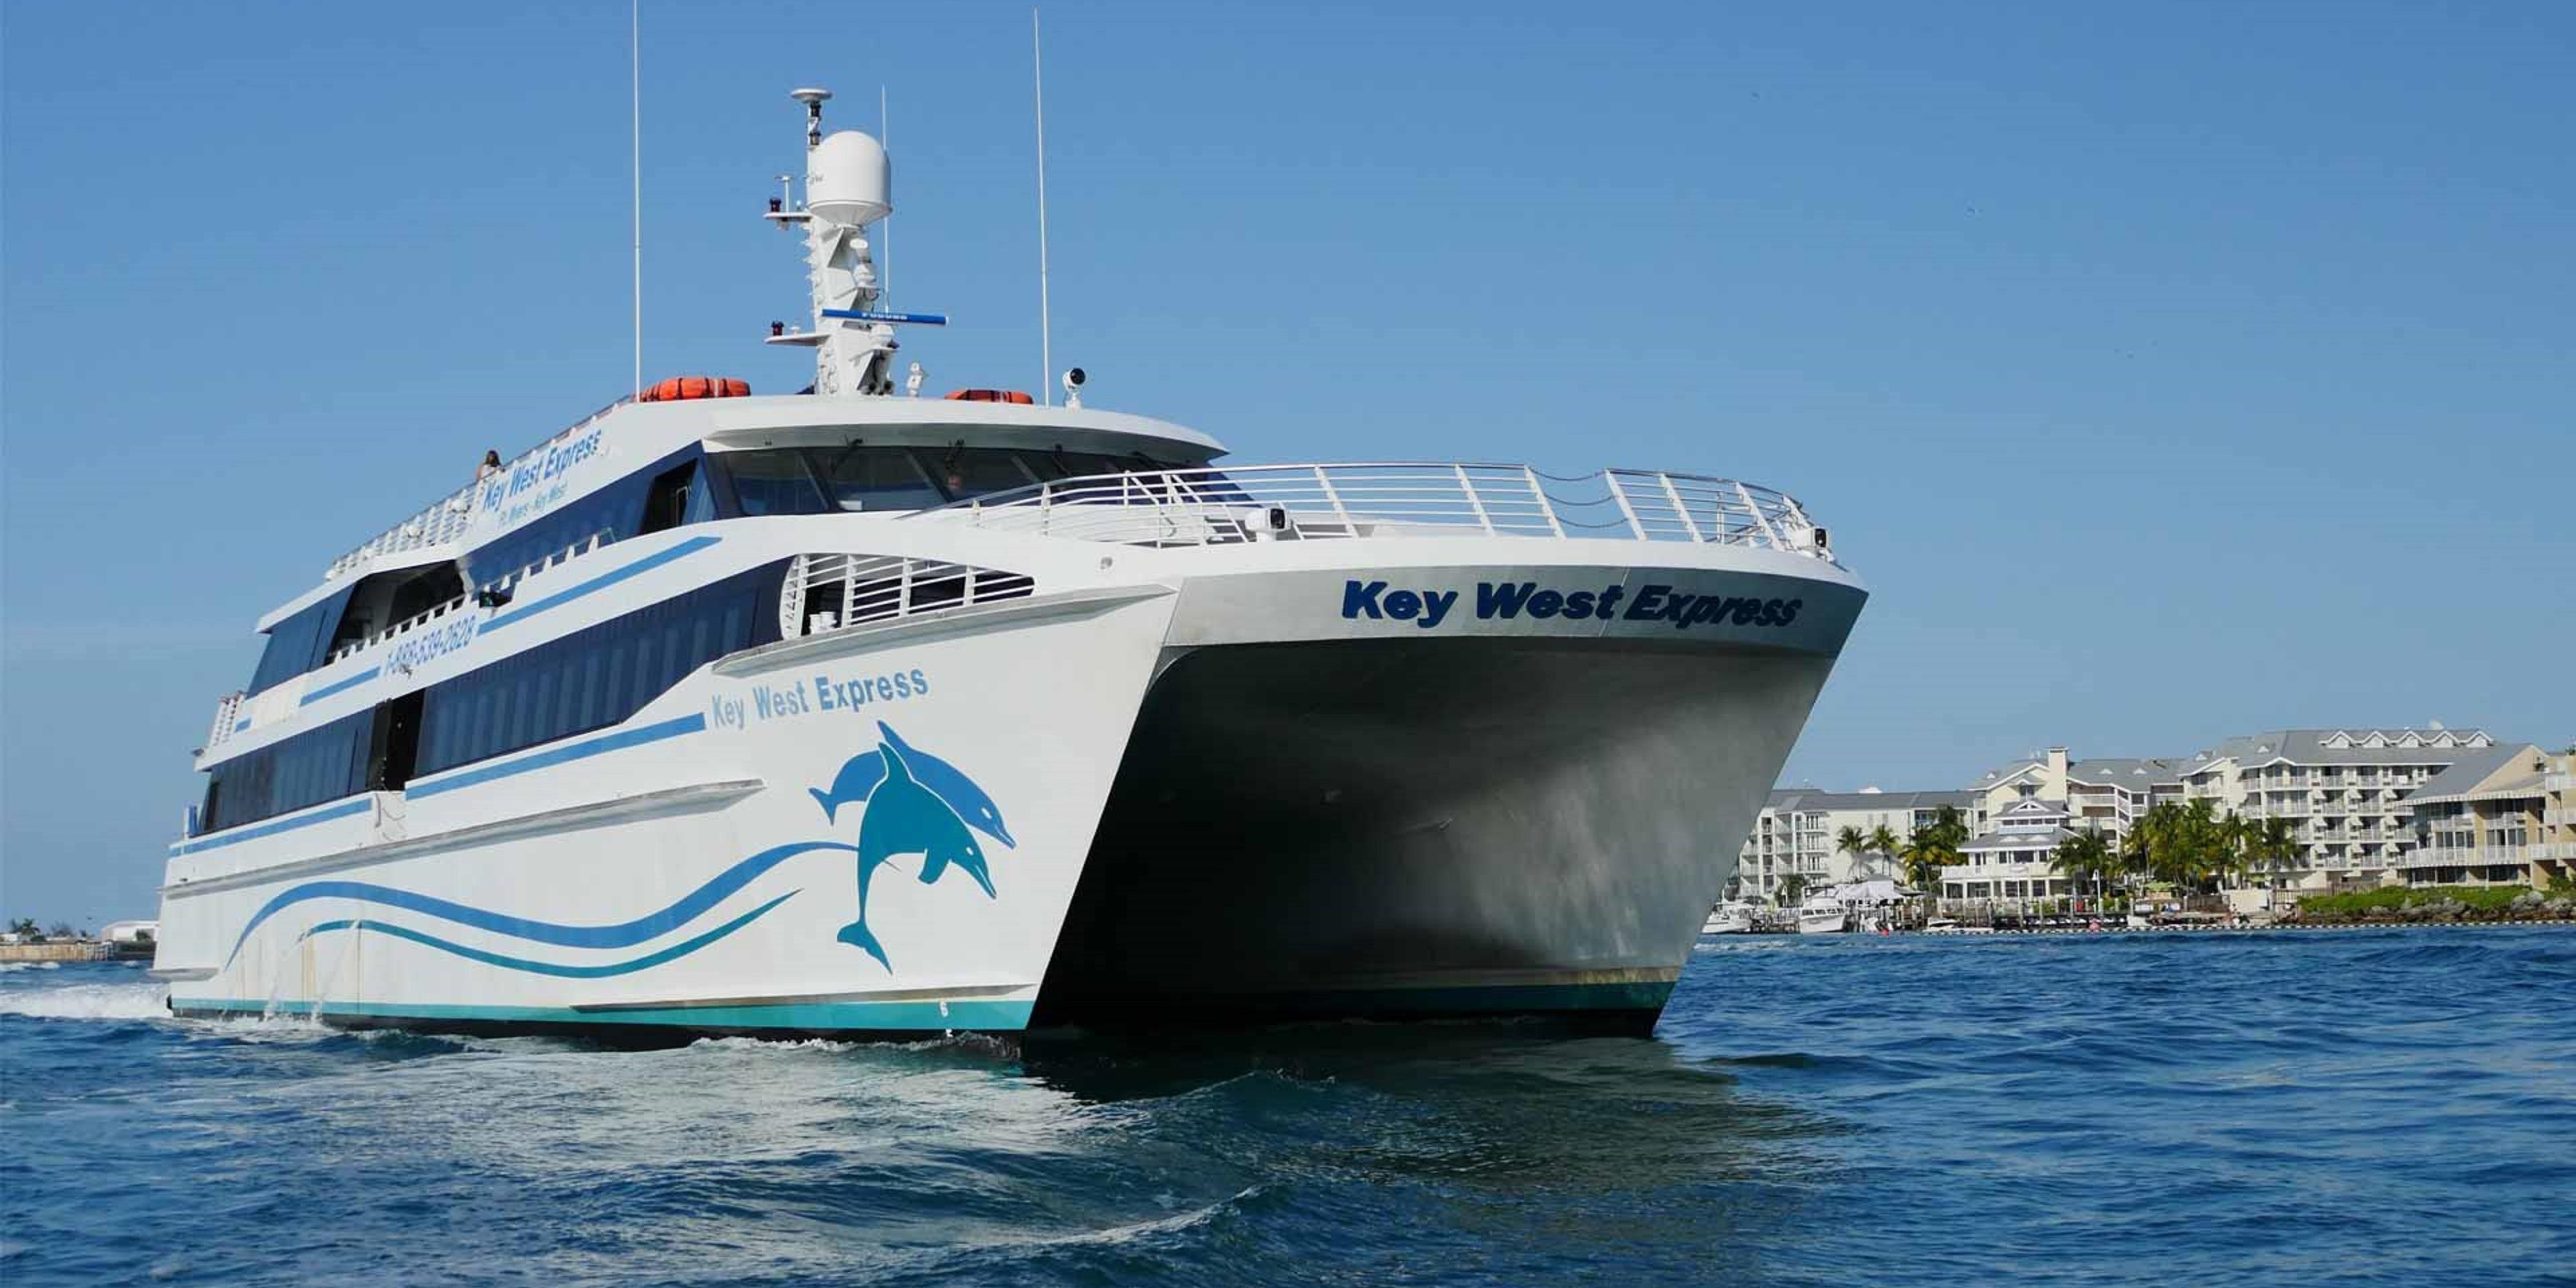 Taking a trip from Fort Myers Beach to Key West? We are just a five-minute drive from the Key West Express dock.